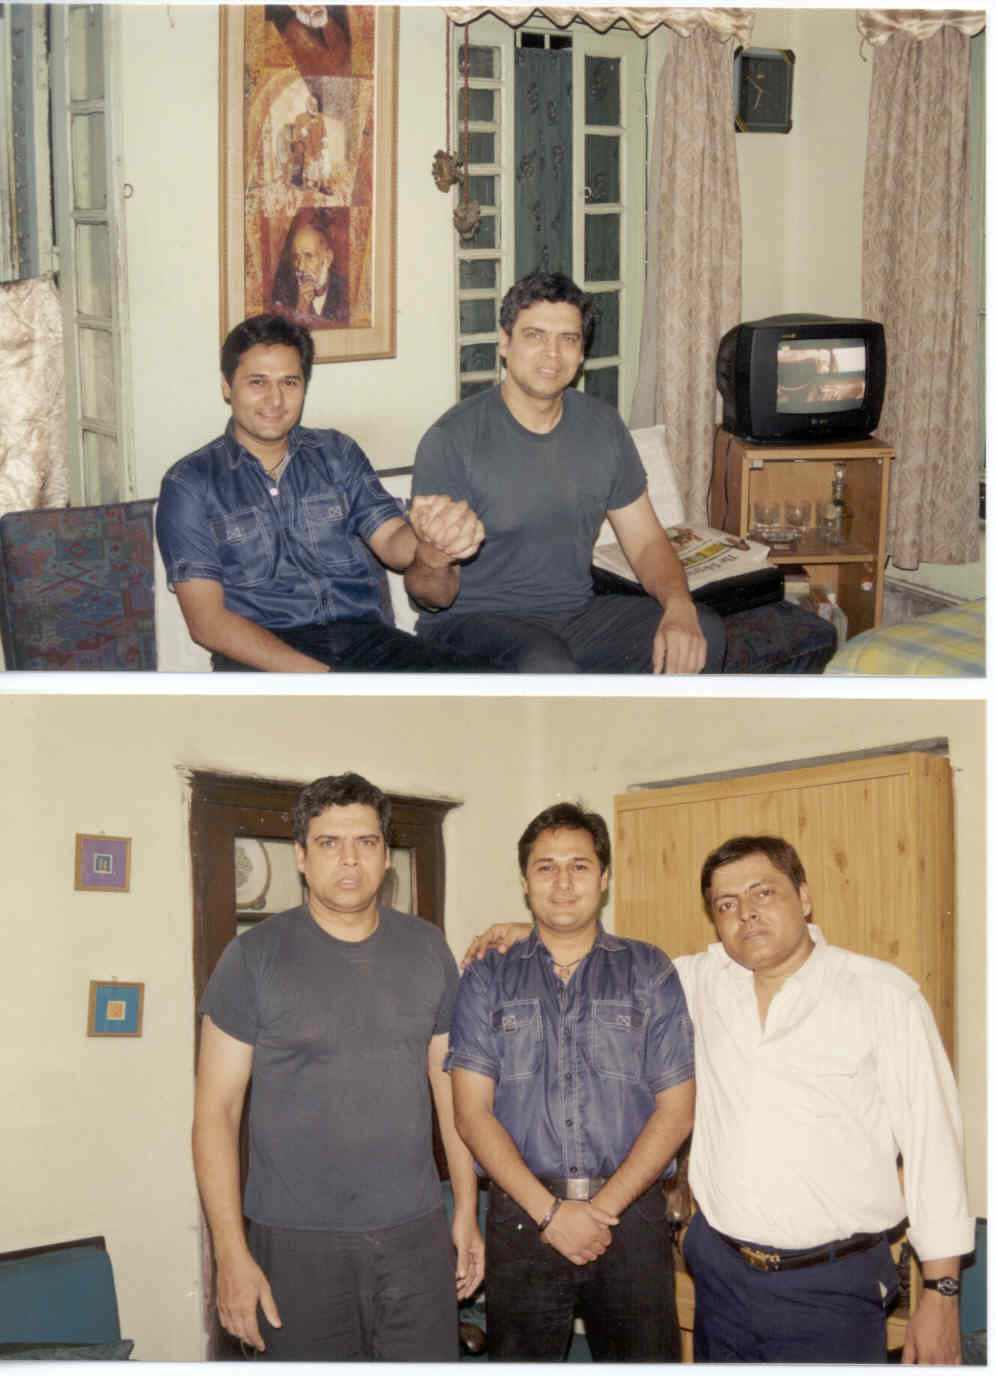 Myself, with one of my first cousins Rajat (a Flight Attendant with Indian Airlines, training to be a Commercial Pilot); and my brother Guddu 